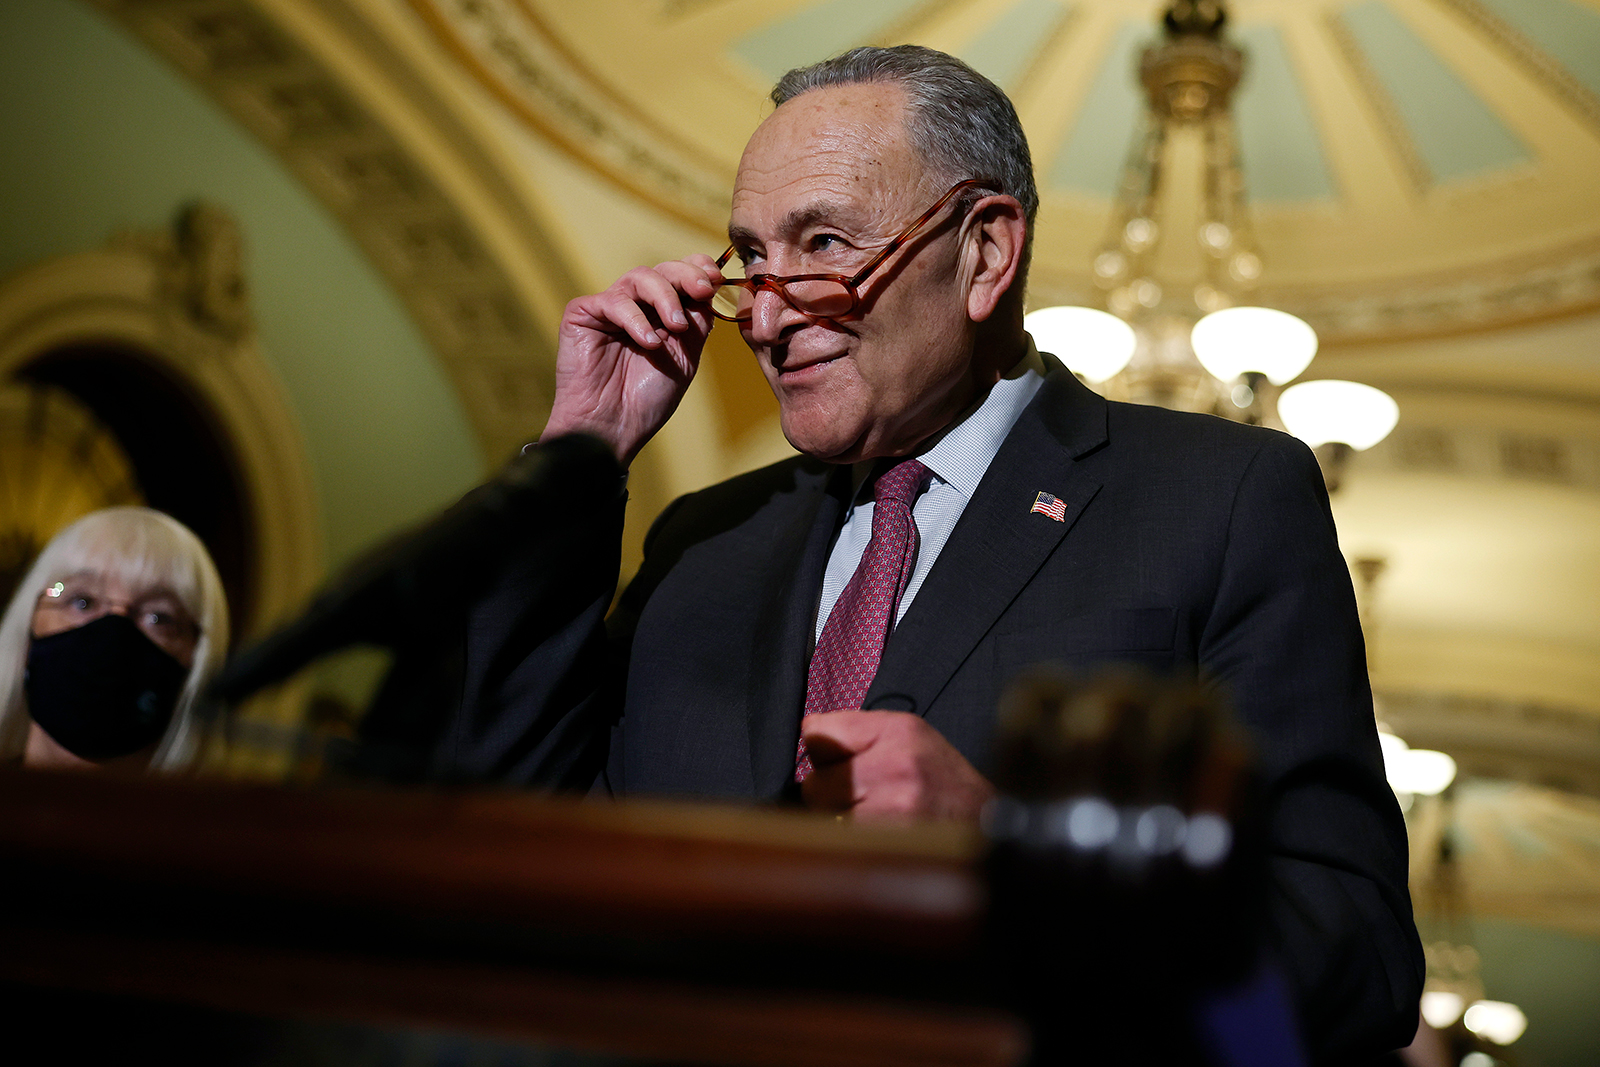 Senate Majority Leader Charles Schumer talks to reporters following the weekly Senate Democratic policy luncheon at the U.S. Capitol on December 14, in Washington, DC. (Chip Somodevilla/Getty Images)